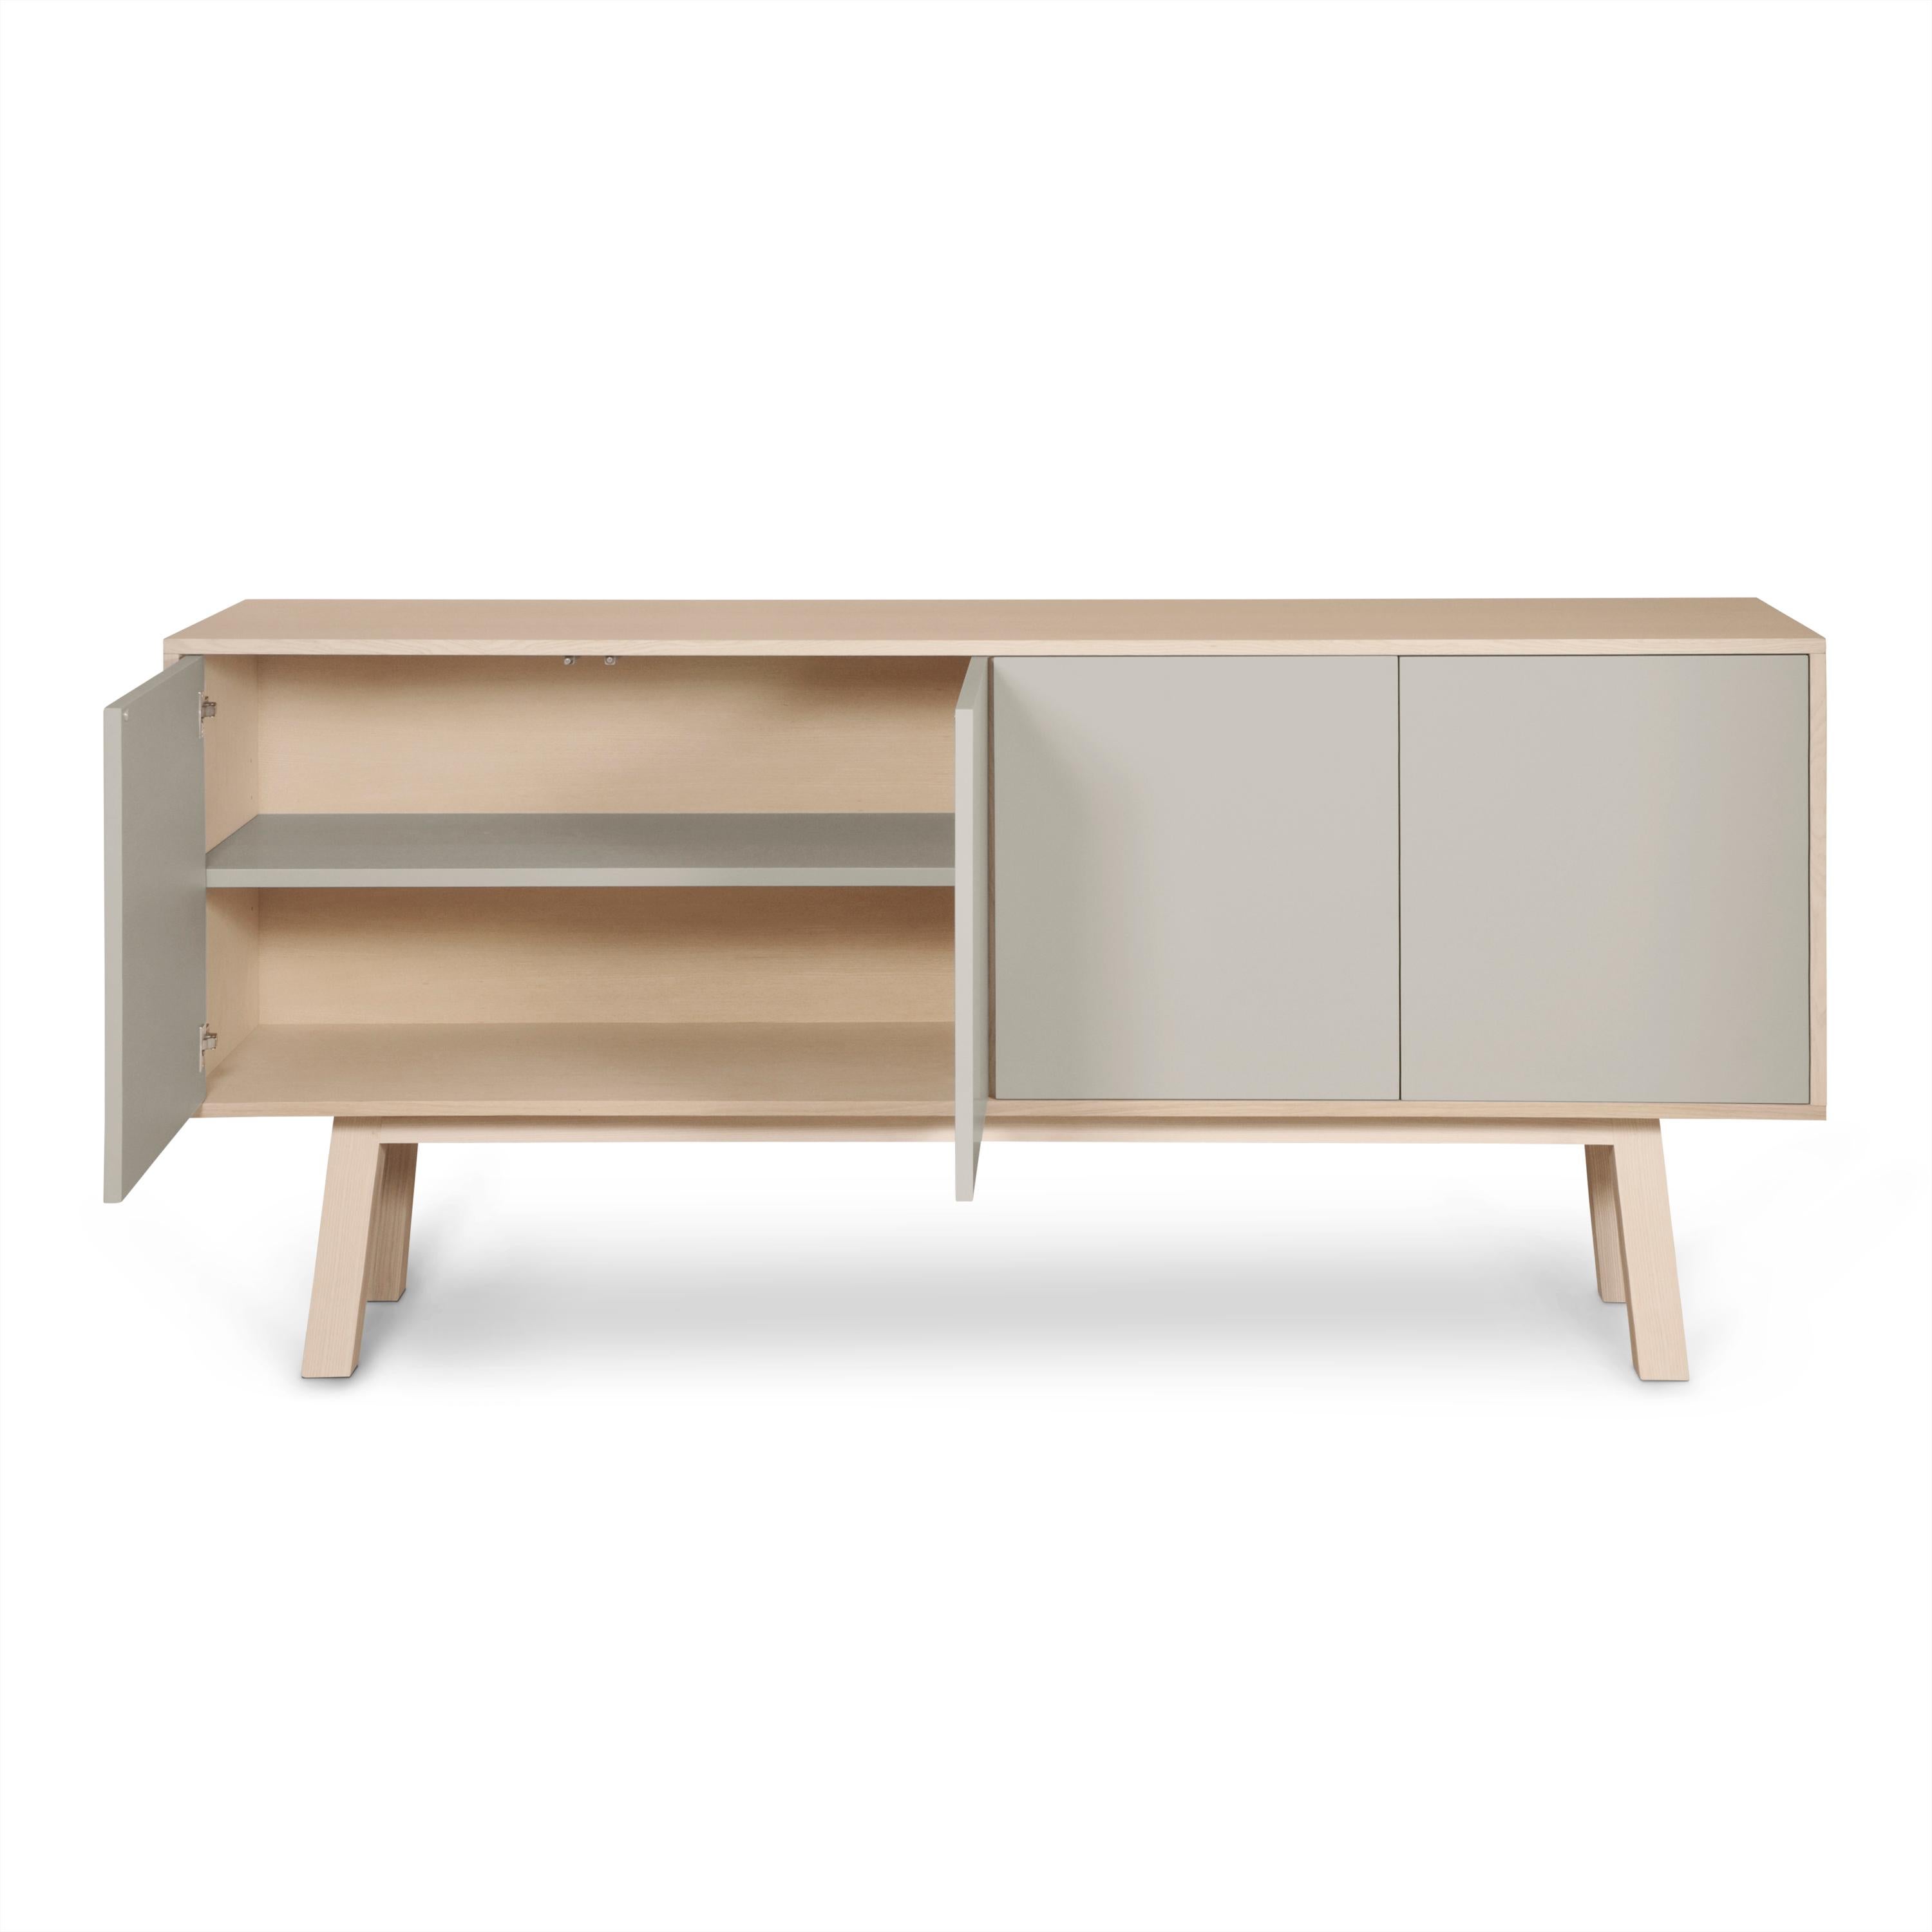 Contemporary Light Grey Sideboard Kube in Wood, Design Eric Gizard, Paris Made in France For Sale